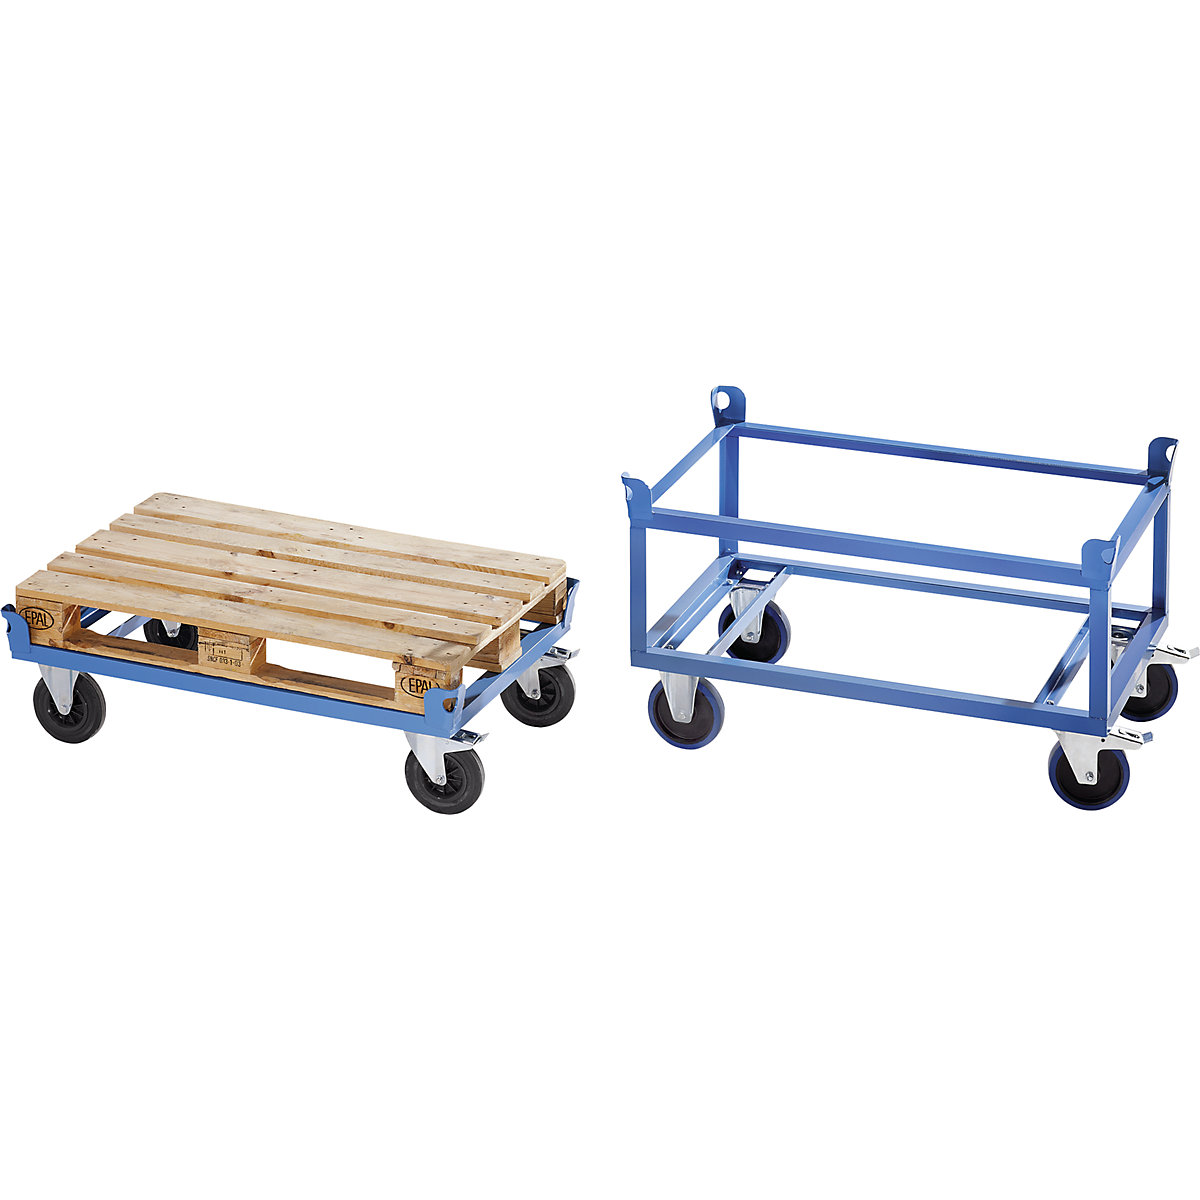 Steel wheeled base – eurokraft pro, for Euro pallets, max. load 500 kg, loading height 650 mm, blue, 5+ items-8